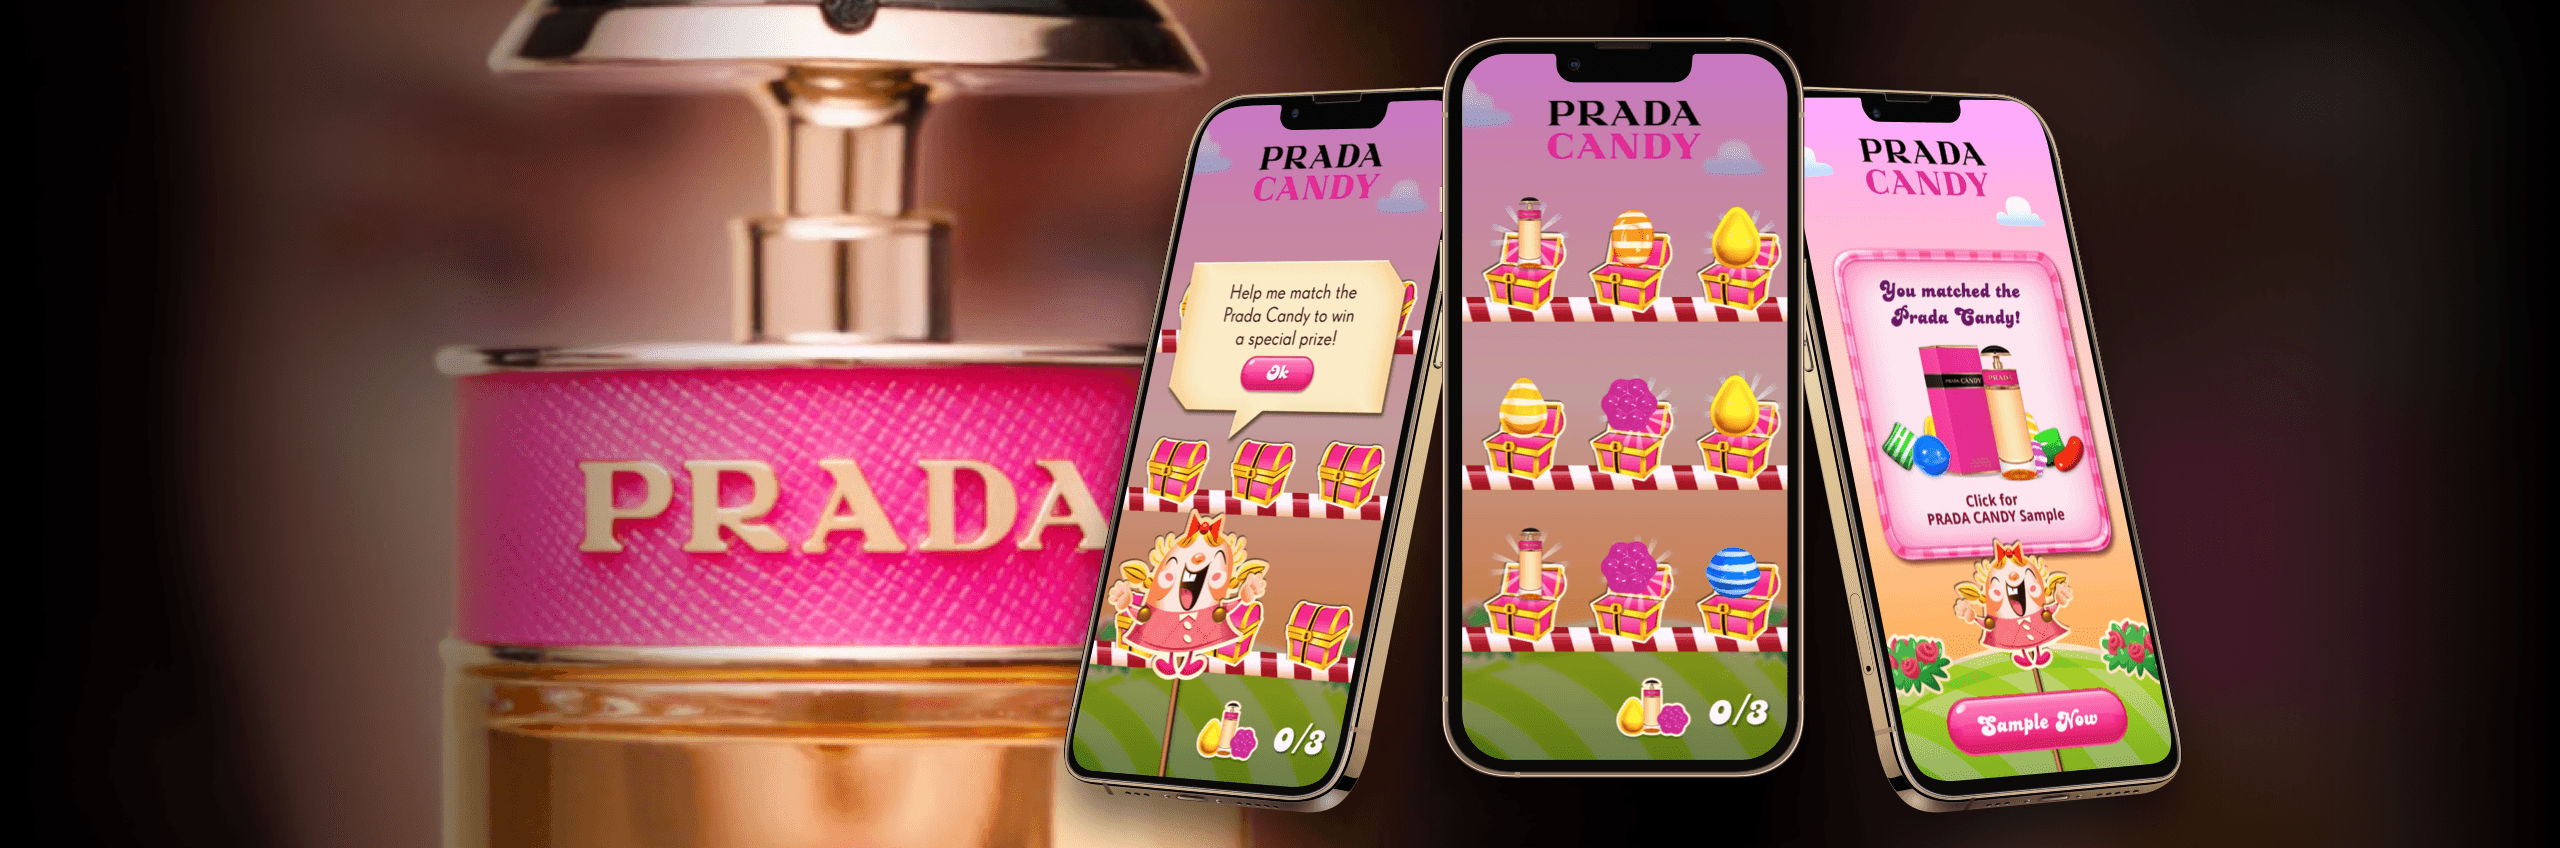 Prada's Candy Crush fragrance campaign drives sales bounce, 1,800% traffic  growth